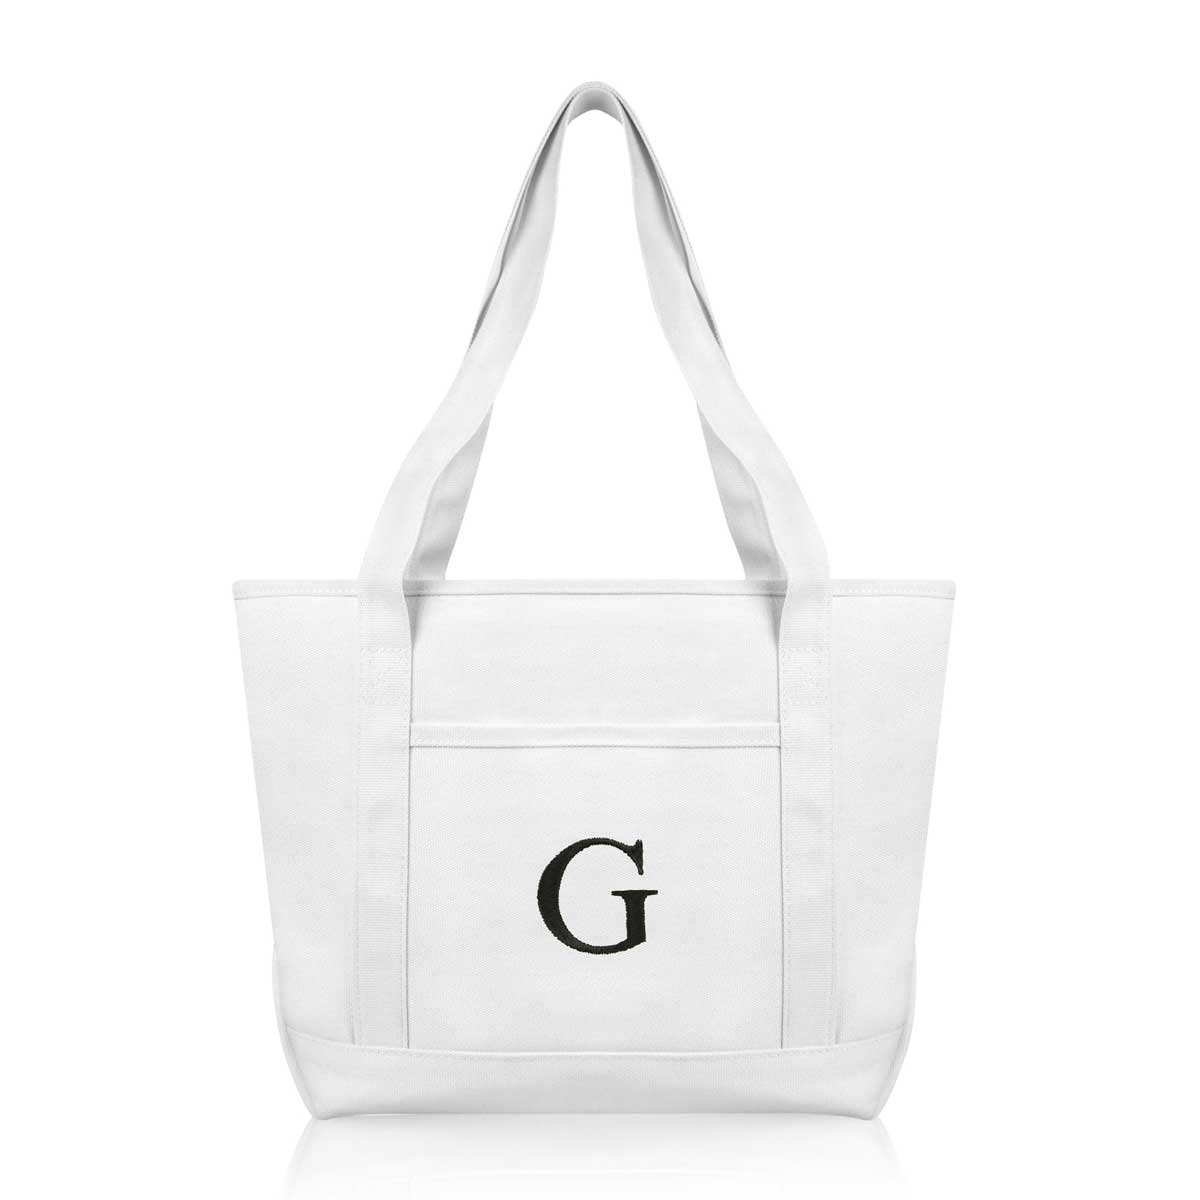 Dalix Medium Personalized Tote Bag Monogrammed Initial Letter - G